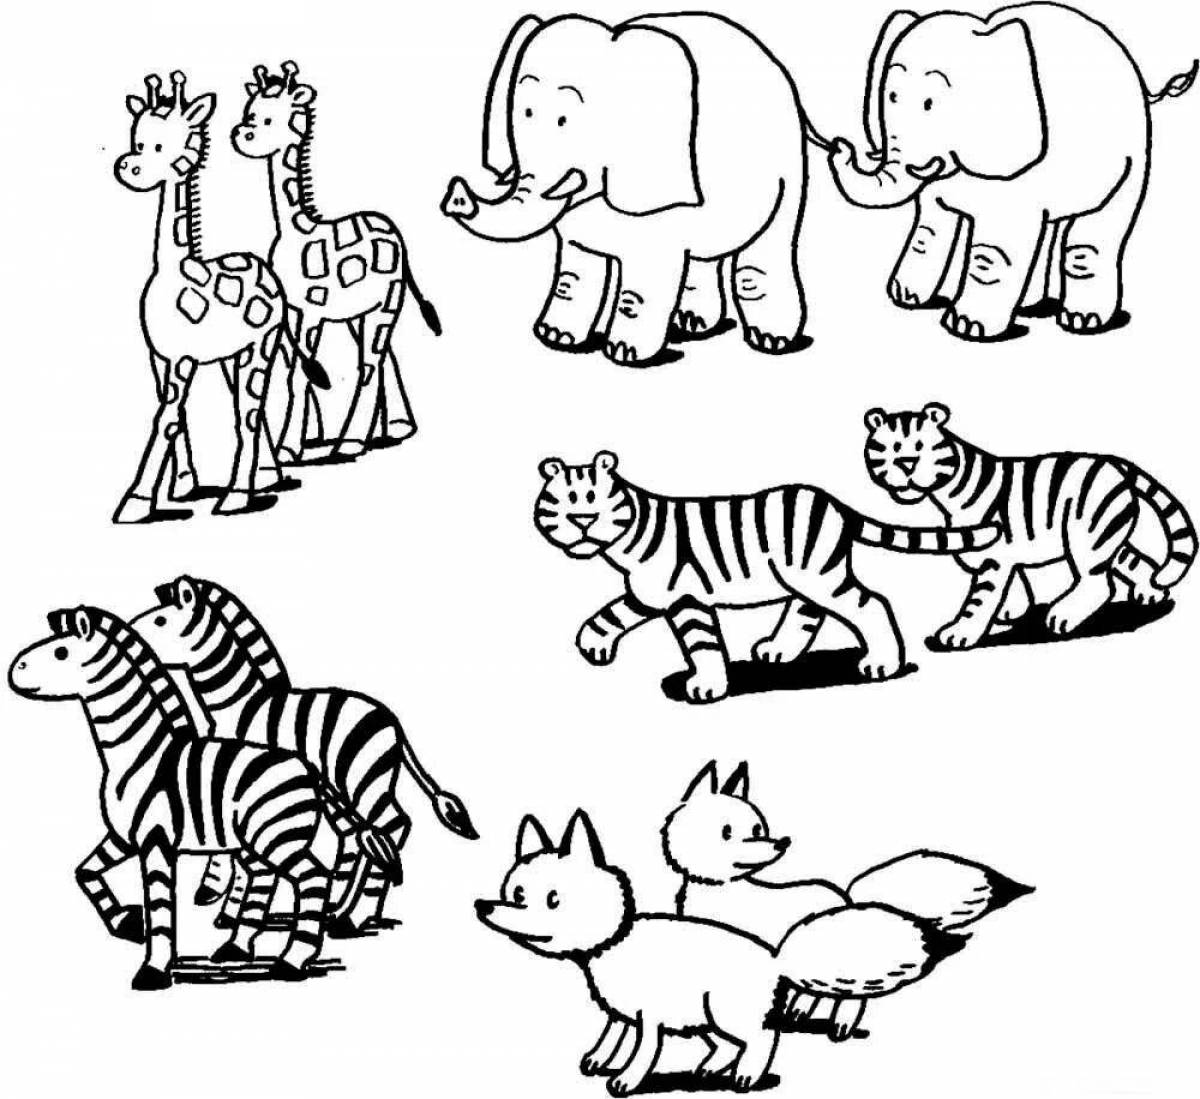 Amazing animal coloring page